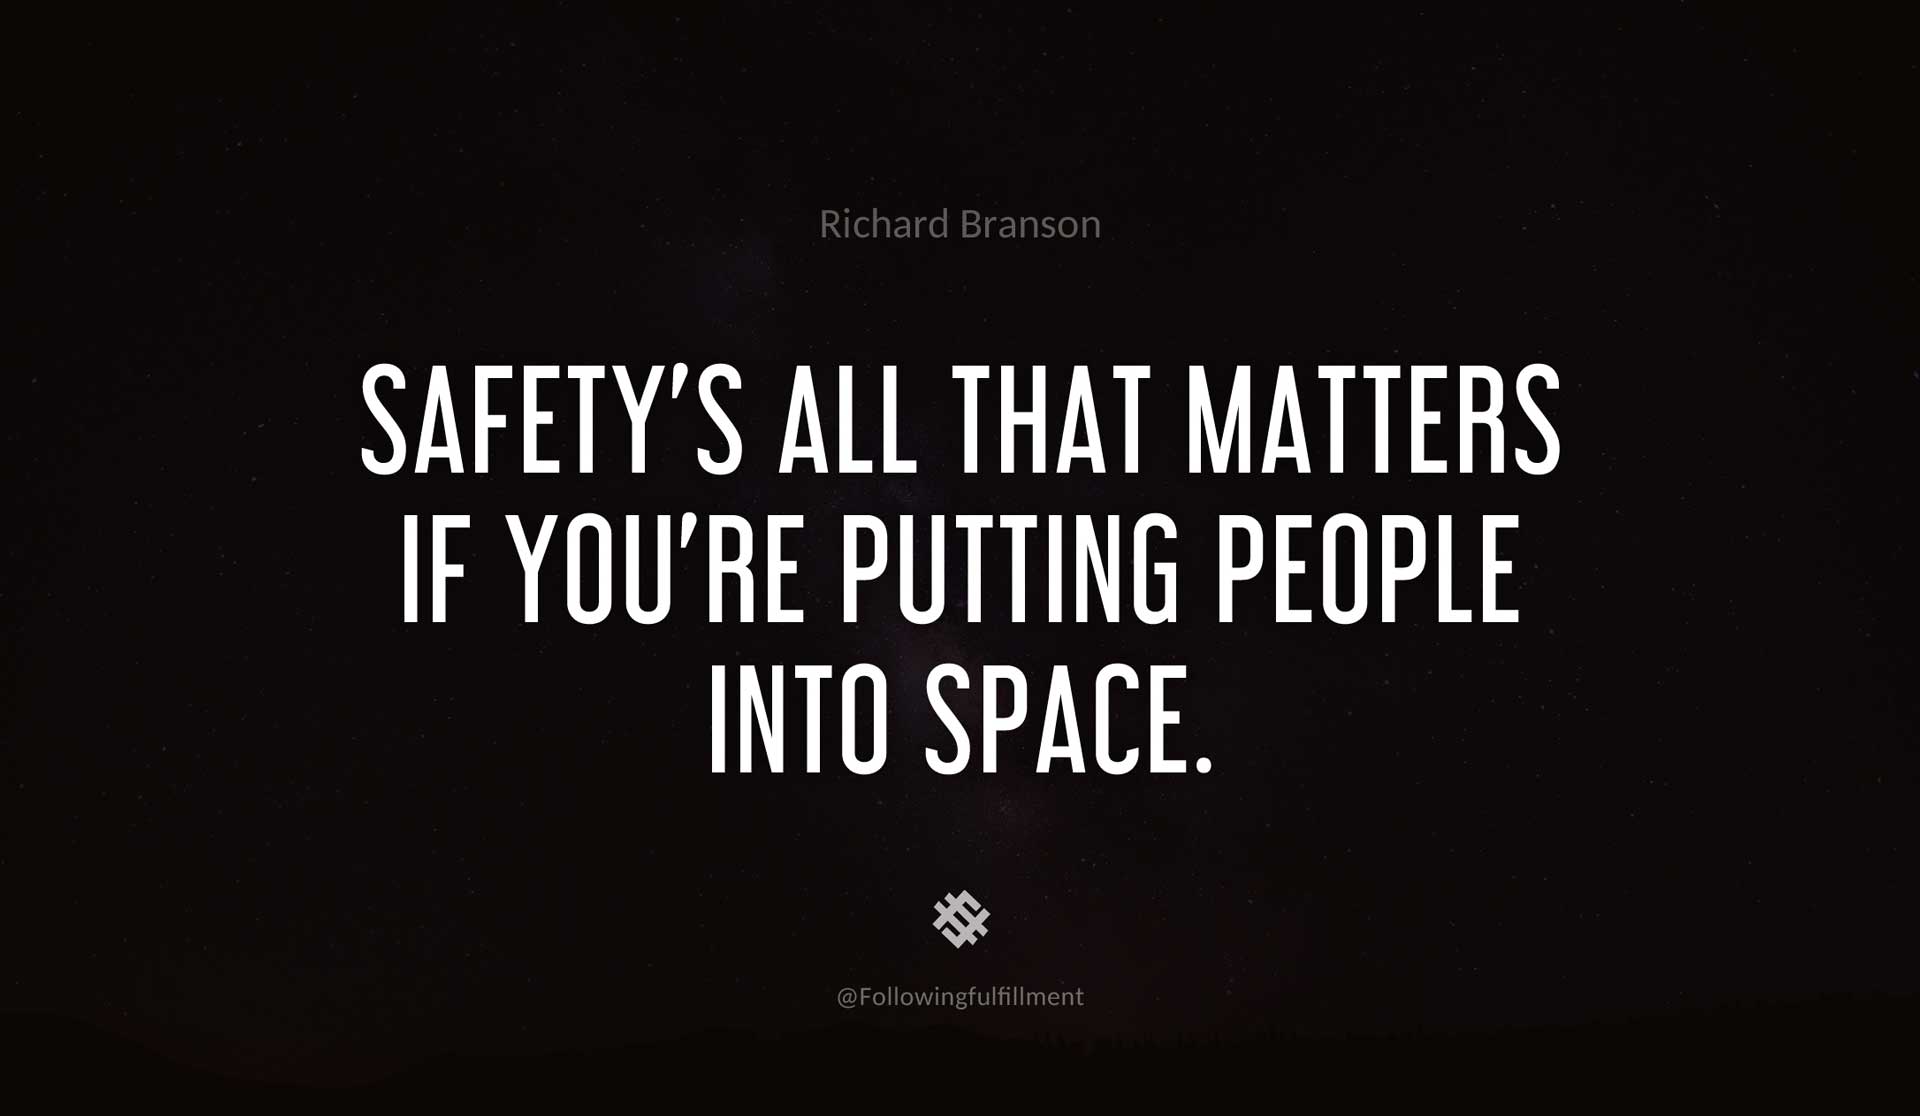 Safety's-all-that-matters-if-you're-putting-people-into-space.-RICHARD-BRANSON-Quote.jpg